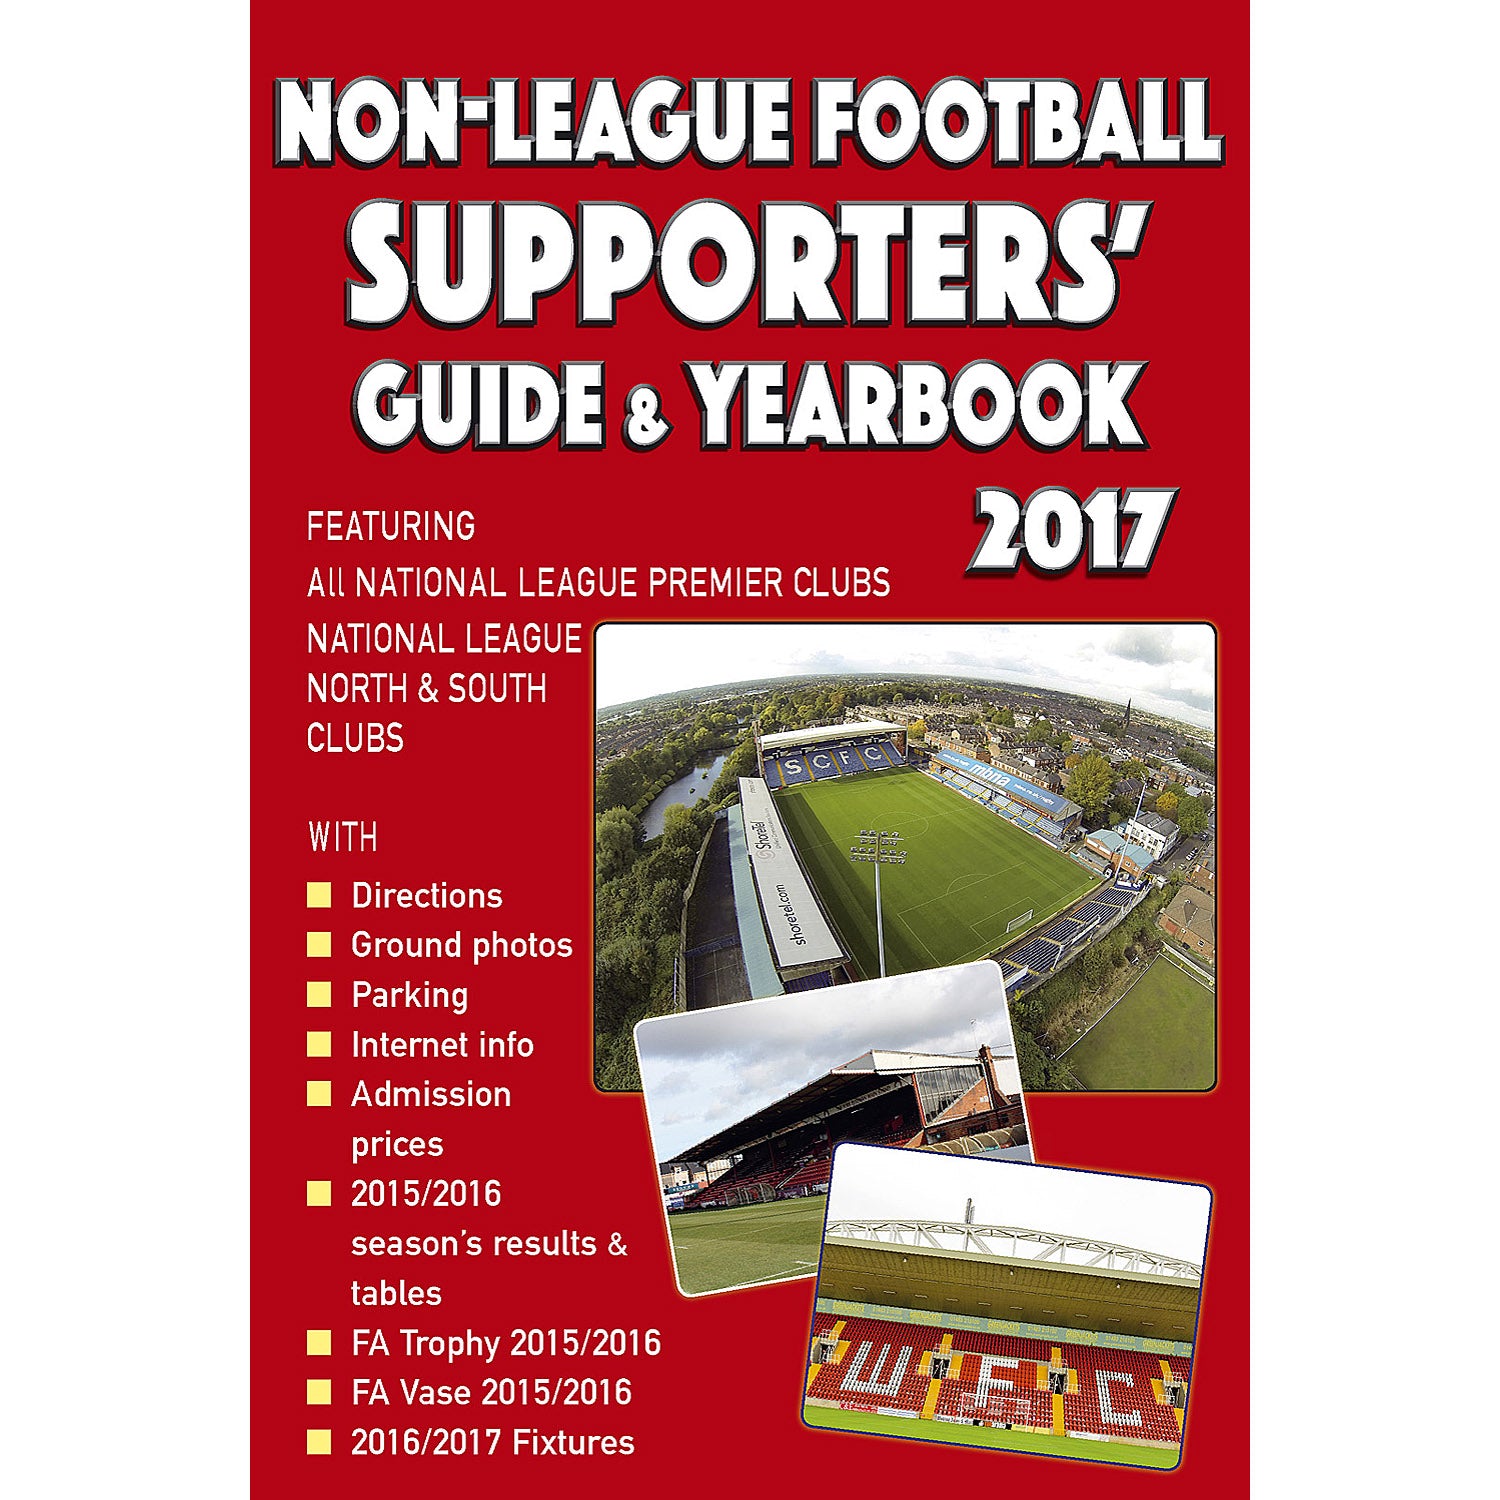 Non-League Football Supporters' Guide & Yearbook 2017